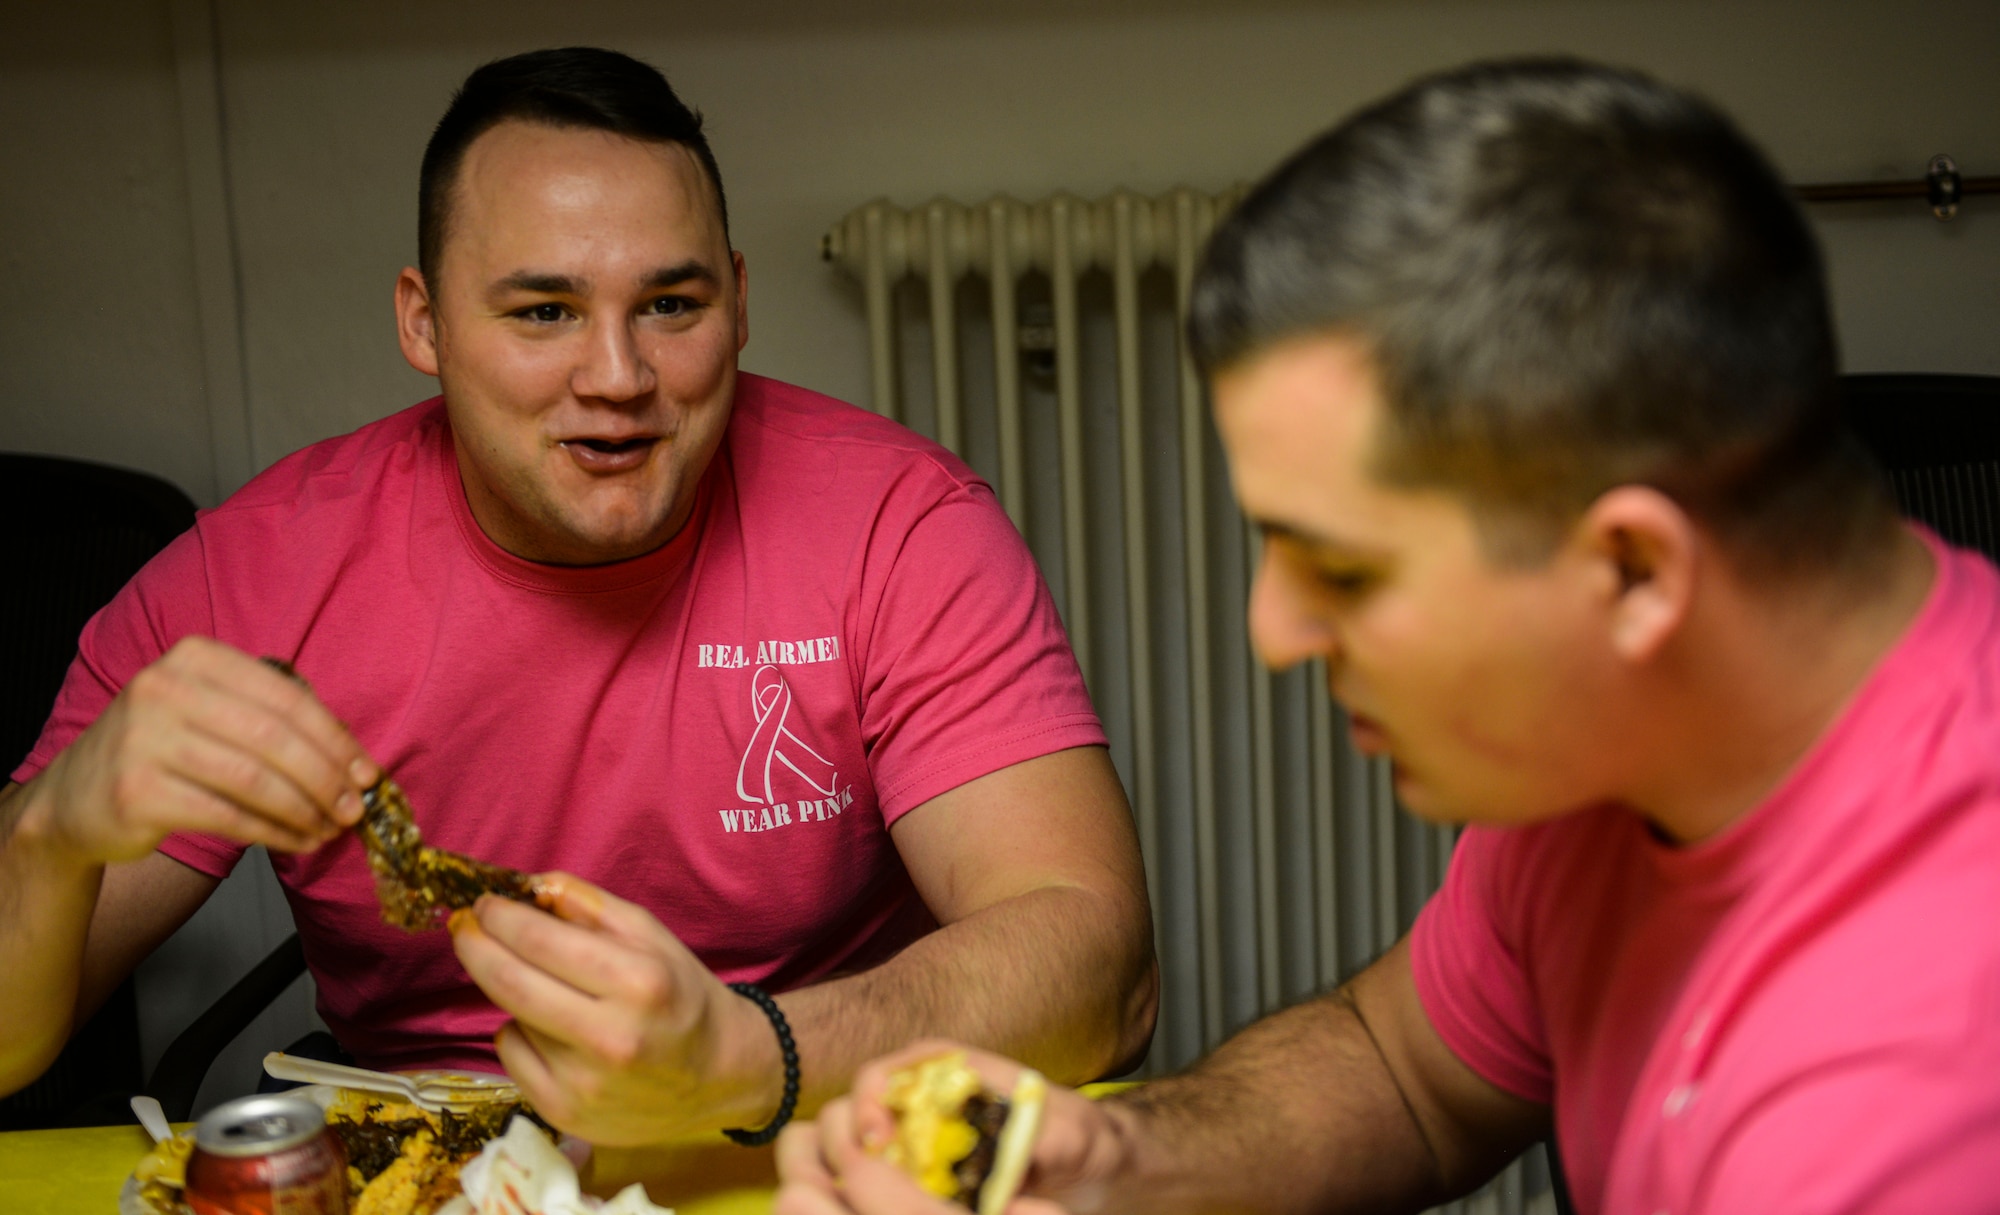 Airman 1st Class Clayton Hardie, left, and Senior Airman Drake Futch, both 86th Dental Squadron dental technicians, wear pink morale shirts during a unit potluck on Ramstein Air Base, Germany, Oct. 7, 2016. The potluck was held on the first day the unit Airmen wore the morale shirts in observance of Breast Cancer Awareness Month. (U.S. Air Force photo by Airman 1st Class Joshua Magbanua)